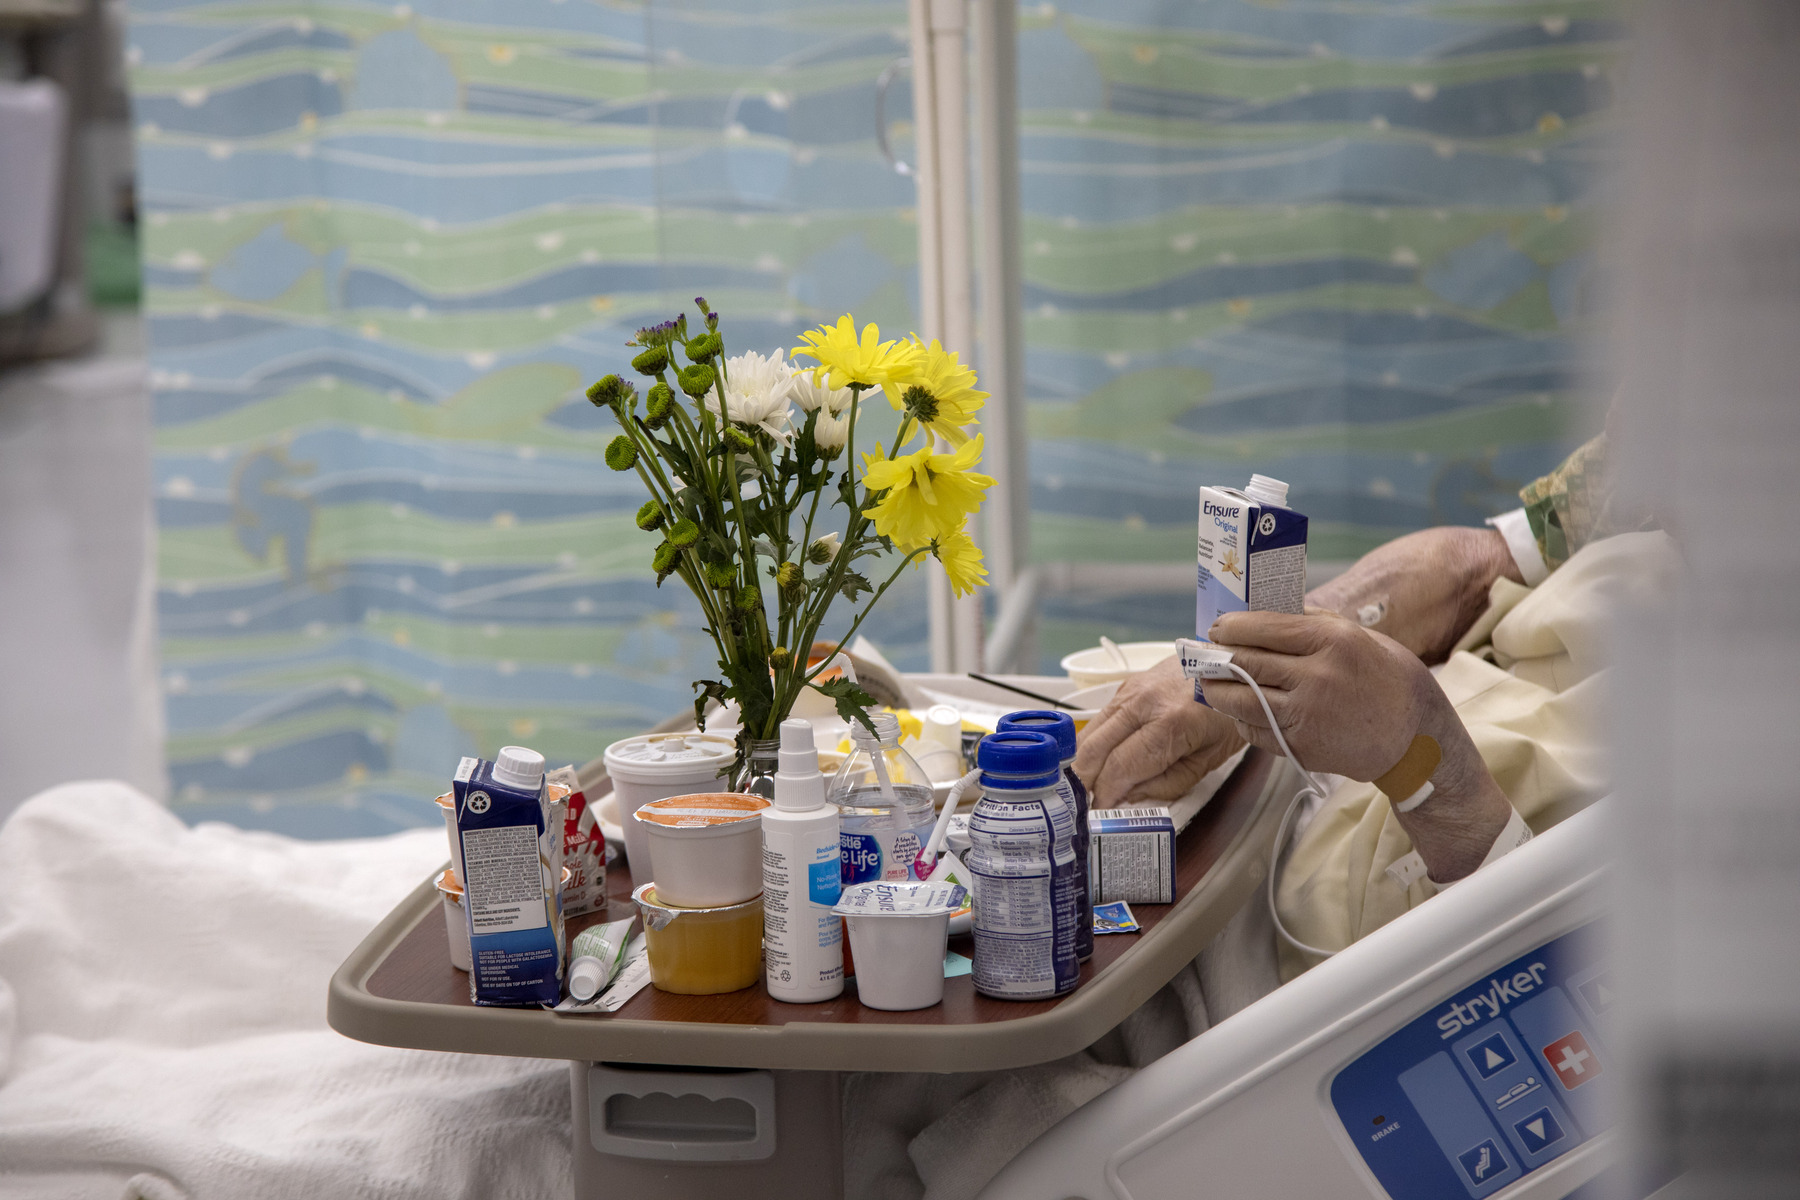 A patient lunch tray in the ICU at Holy Name Medical Center during the COVID-19 Pandemic. 4/21/2020 Photo by Jeff Rhode